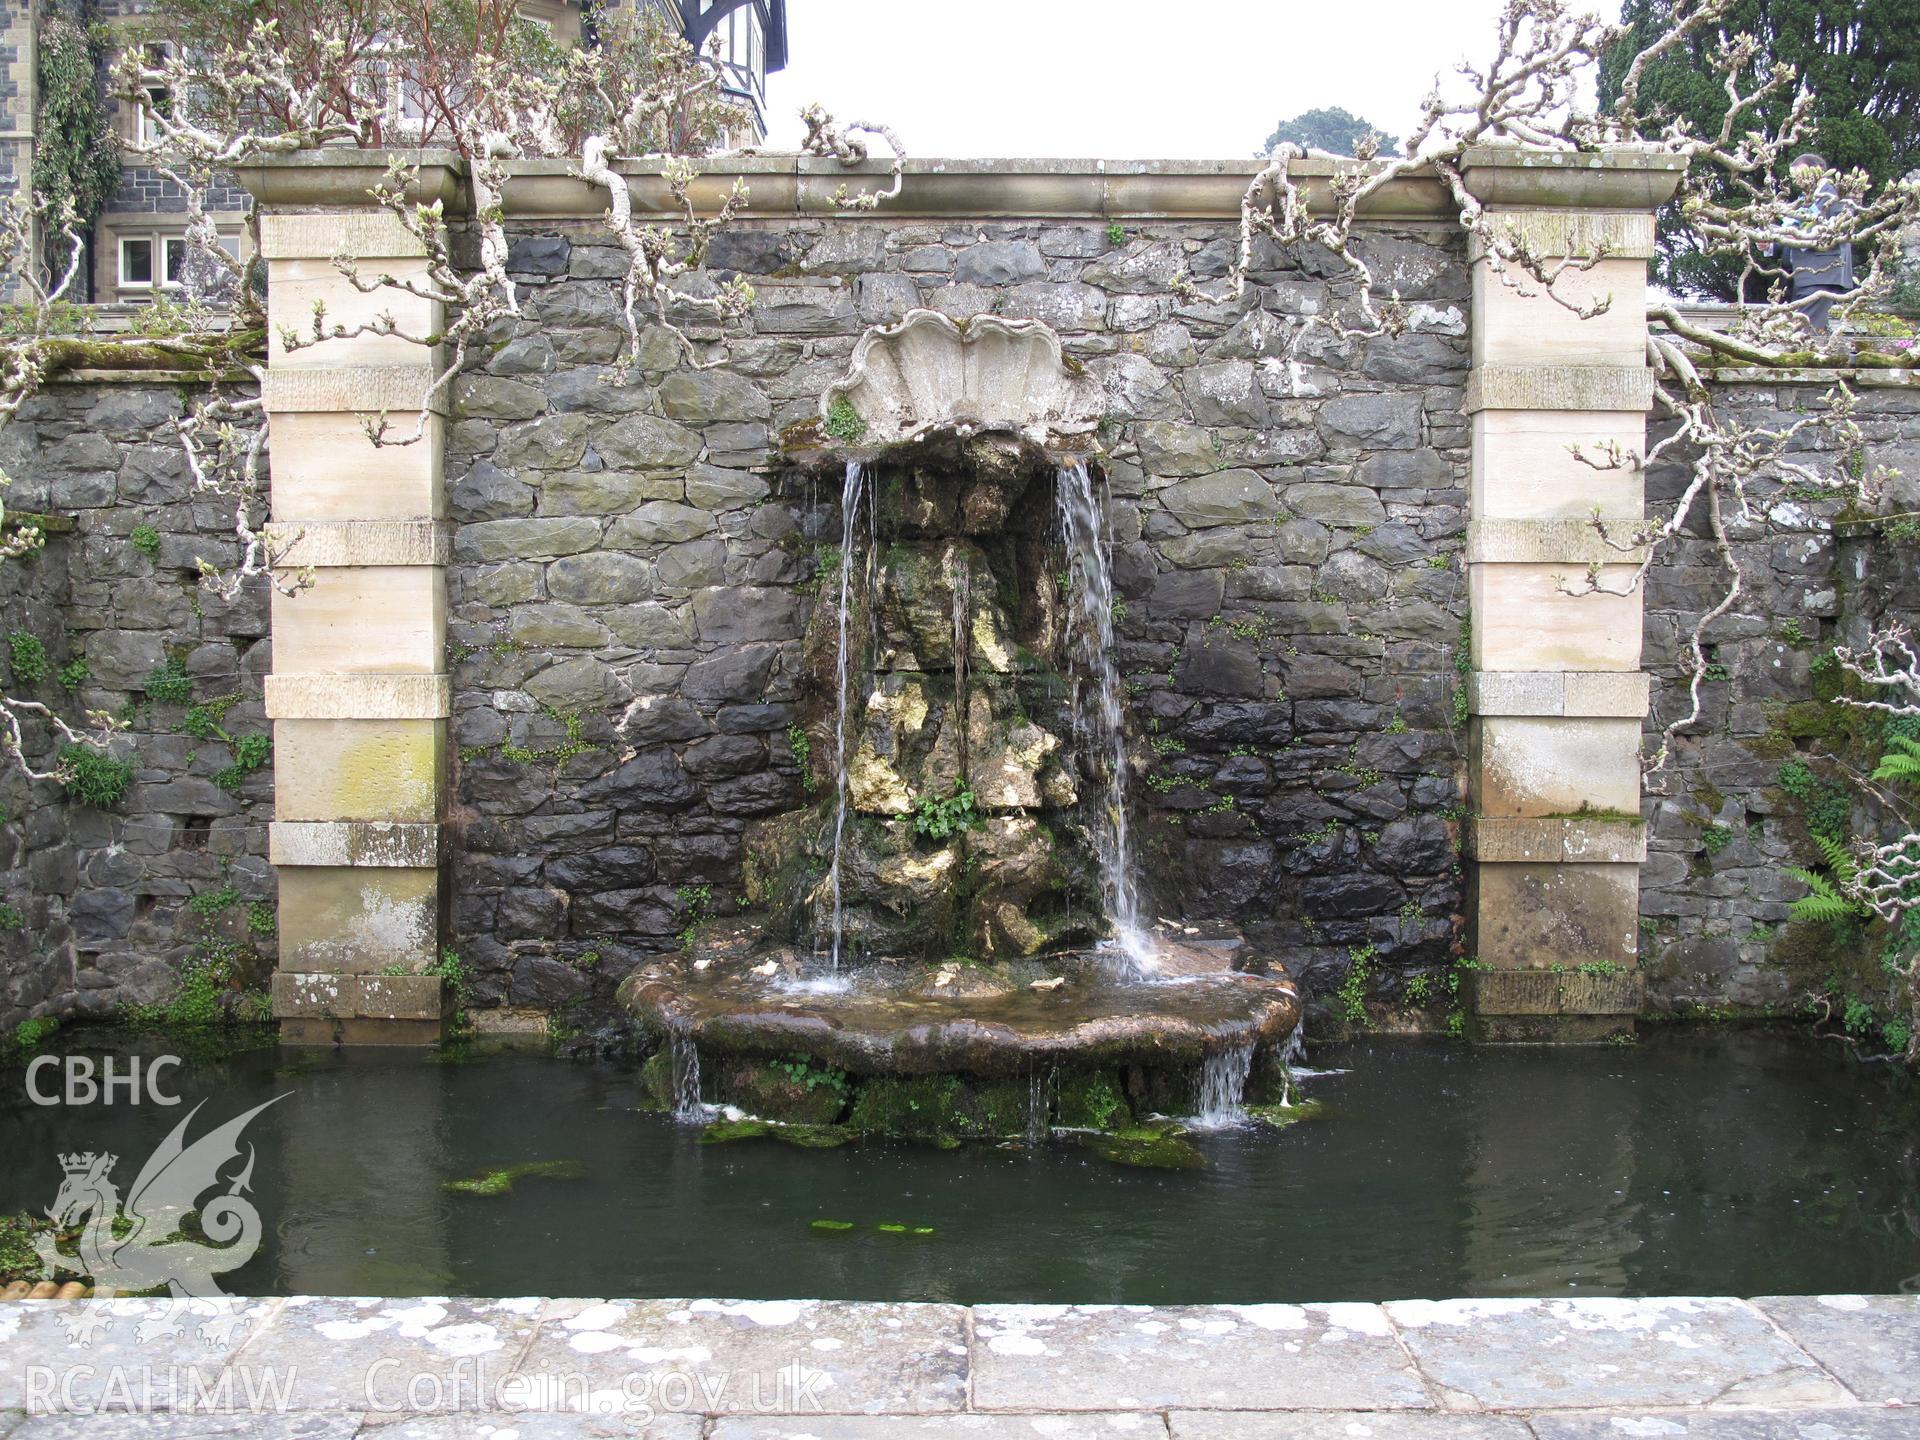 French Baroque fountain set in the east retaining wall above the Croquet Lawn.